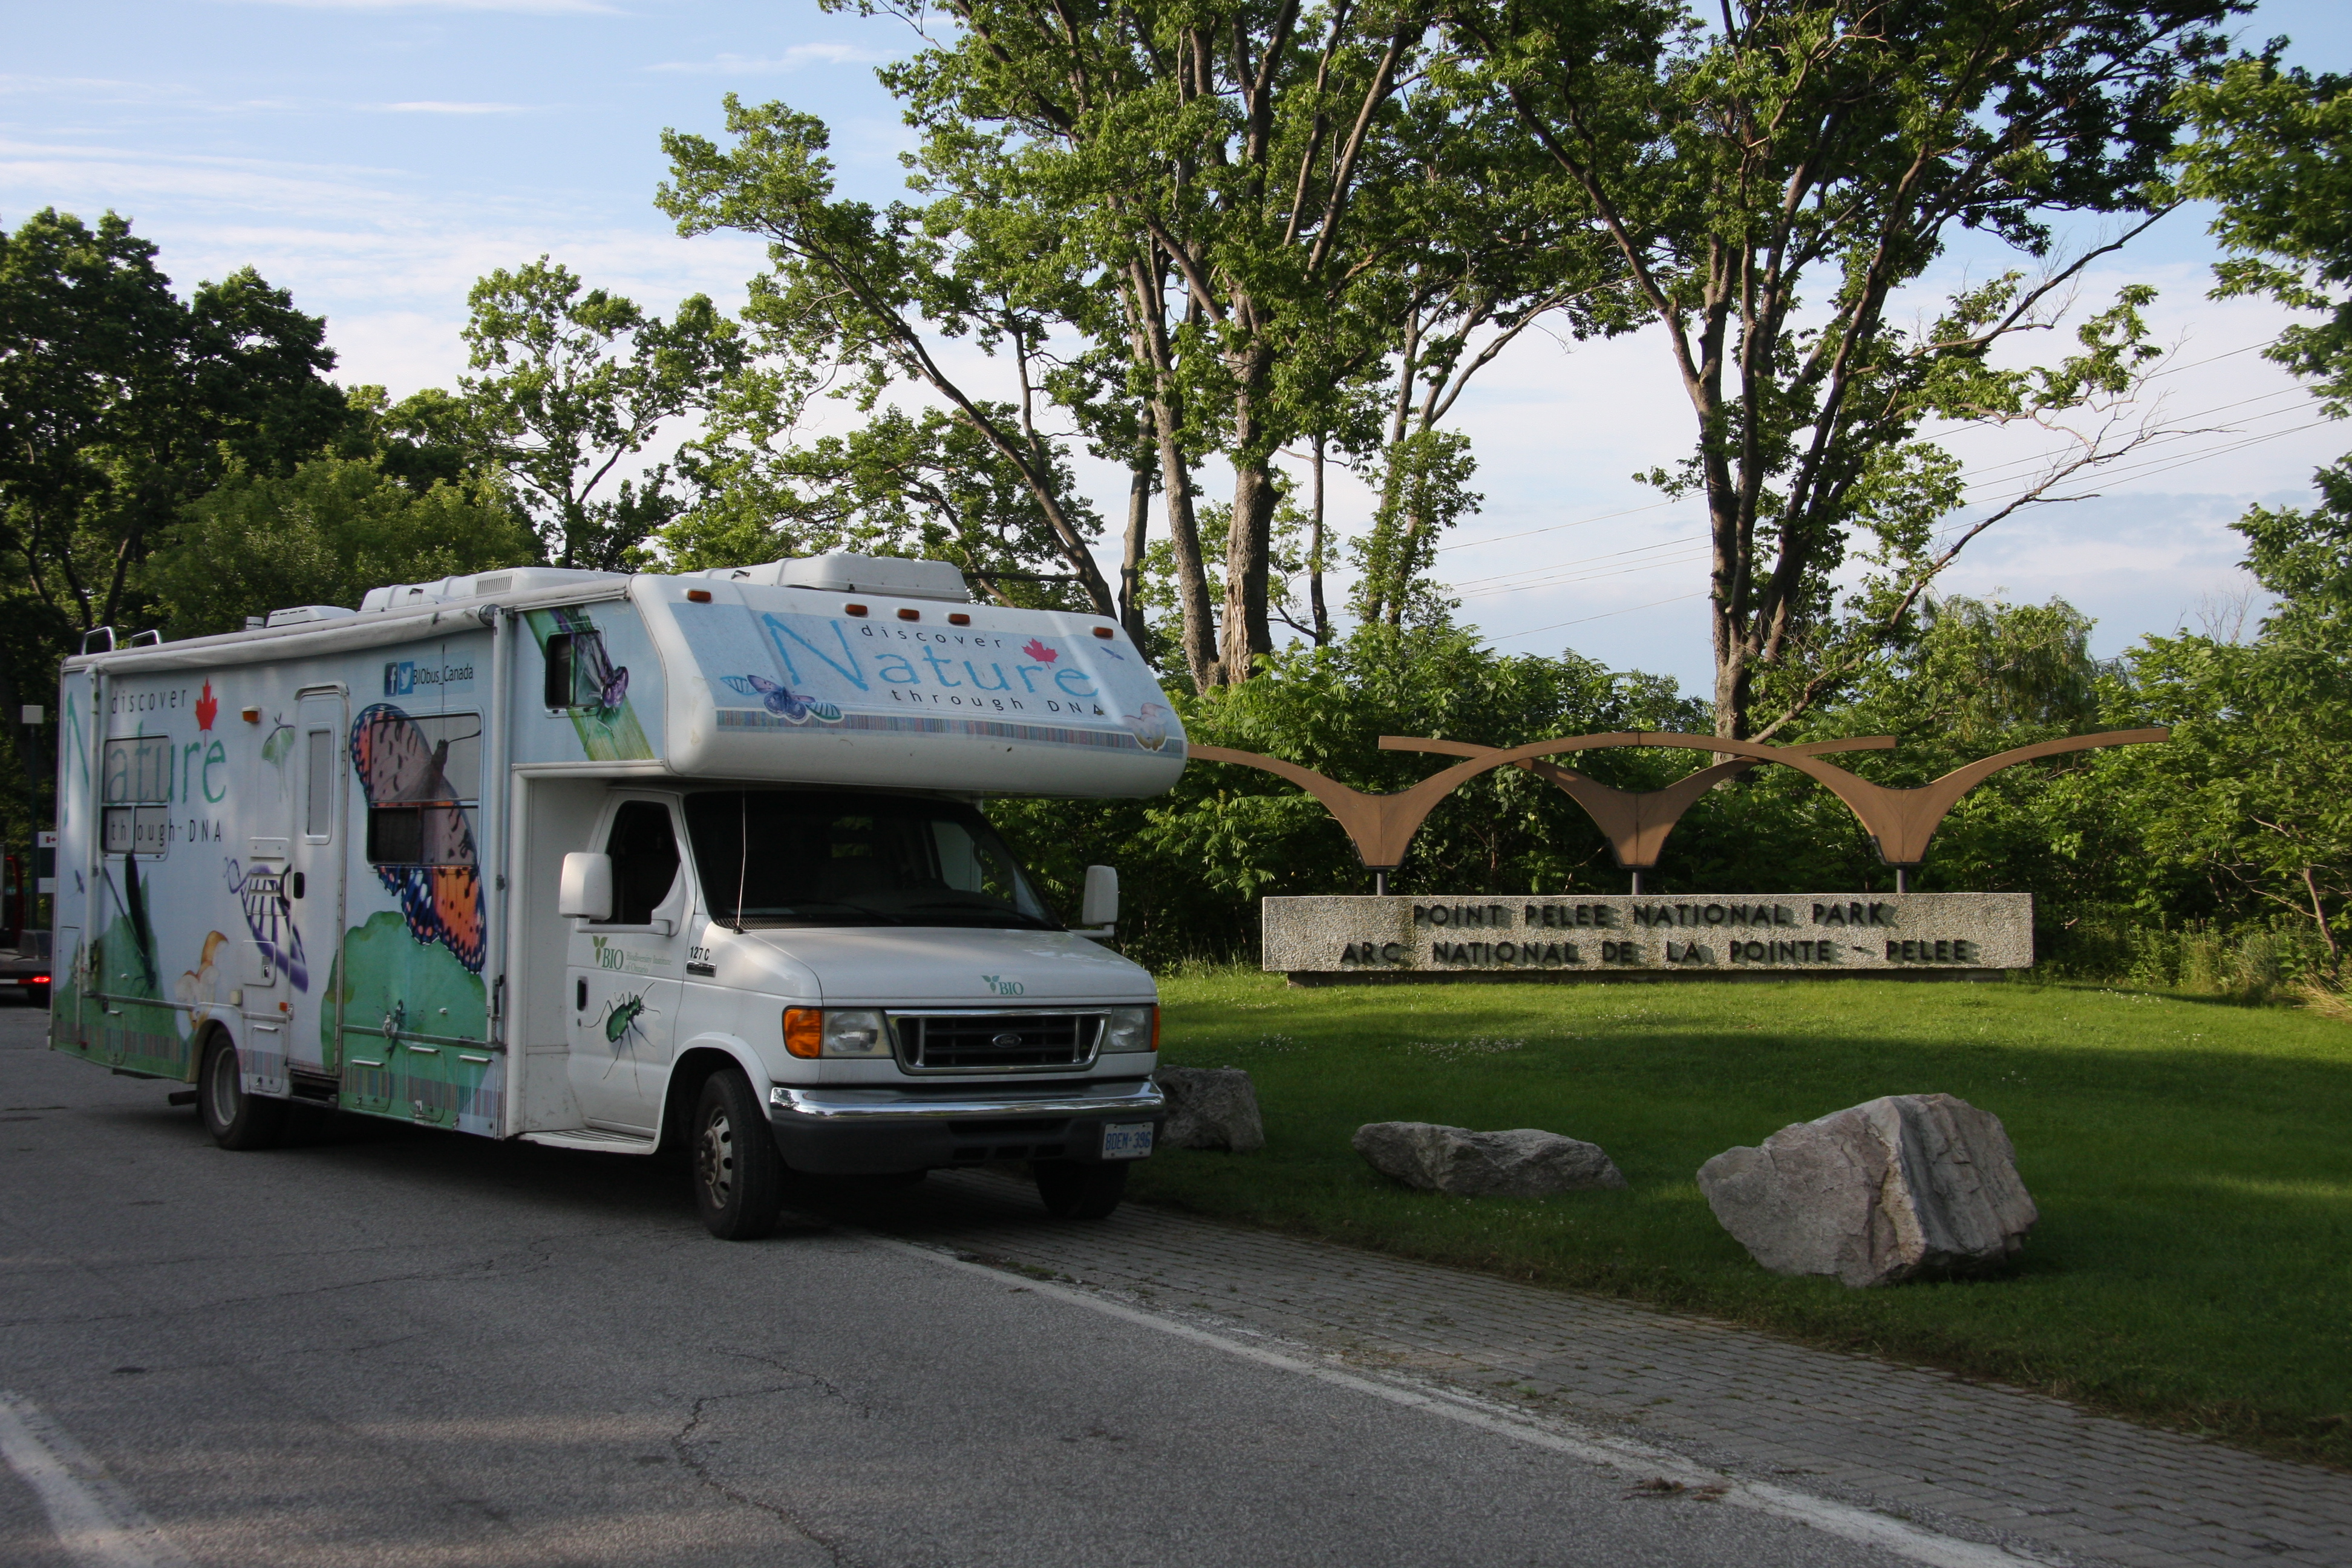 he BIObus has arrived at Point Pelee National Park